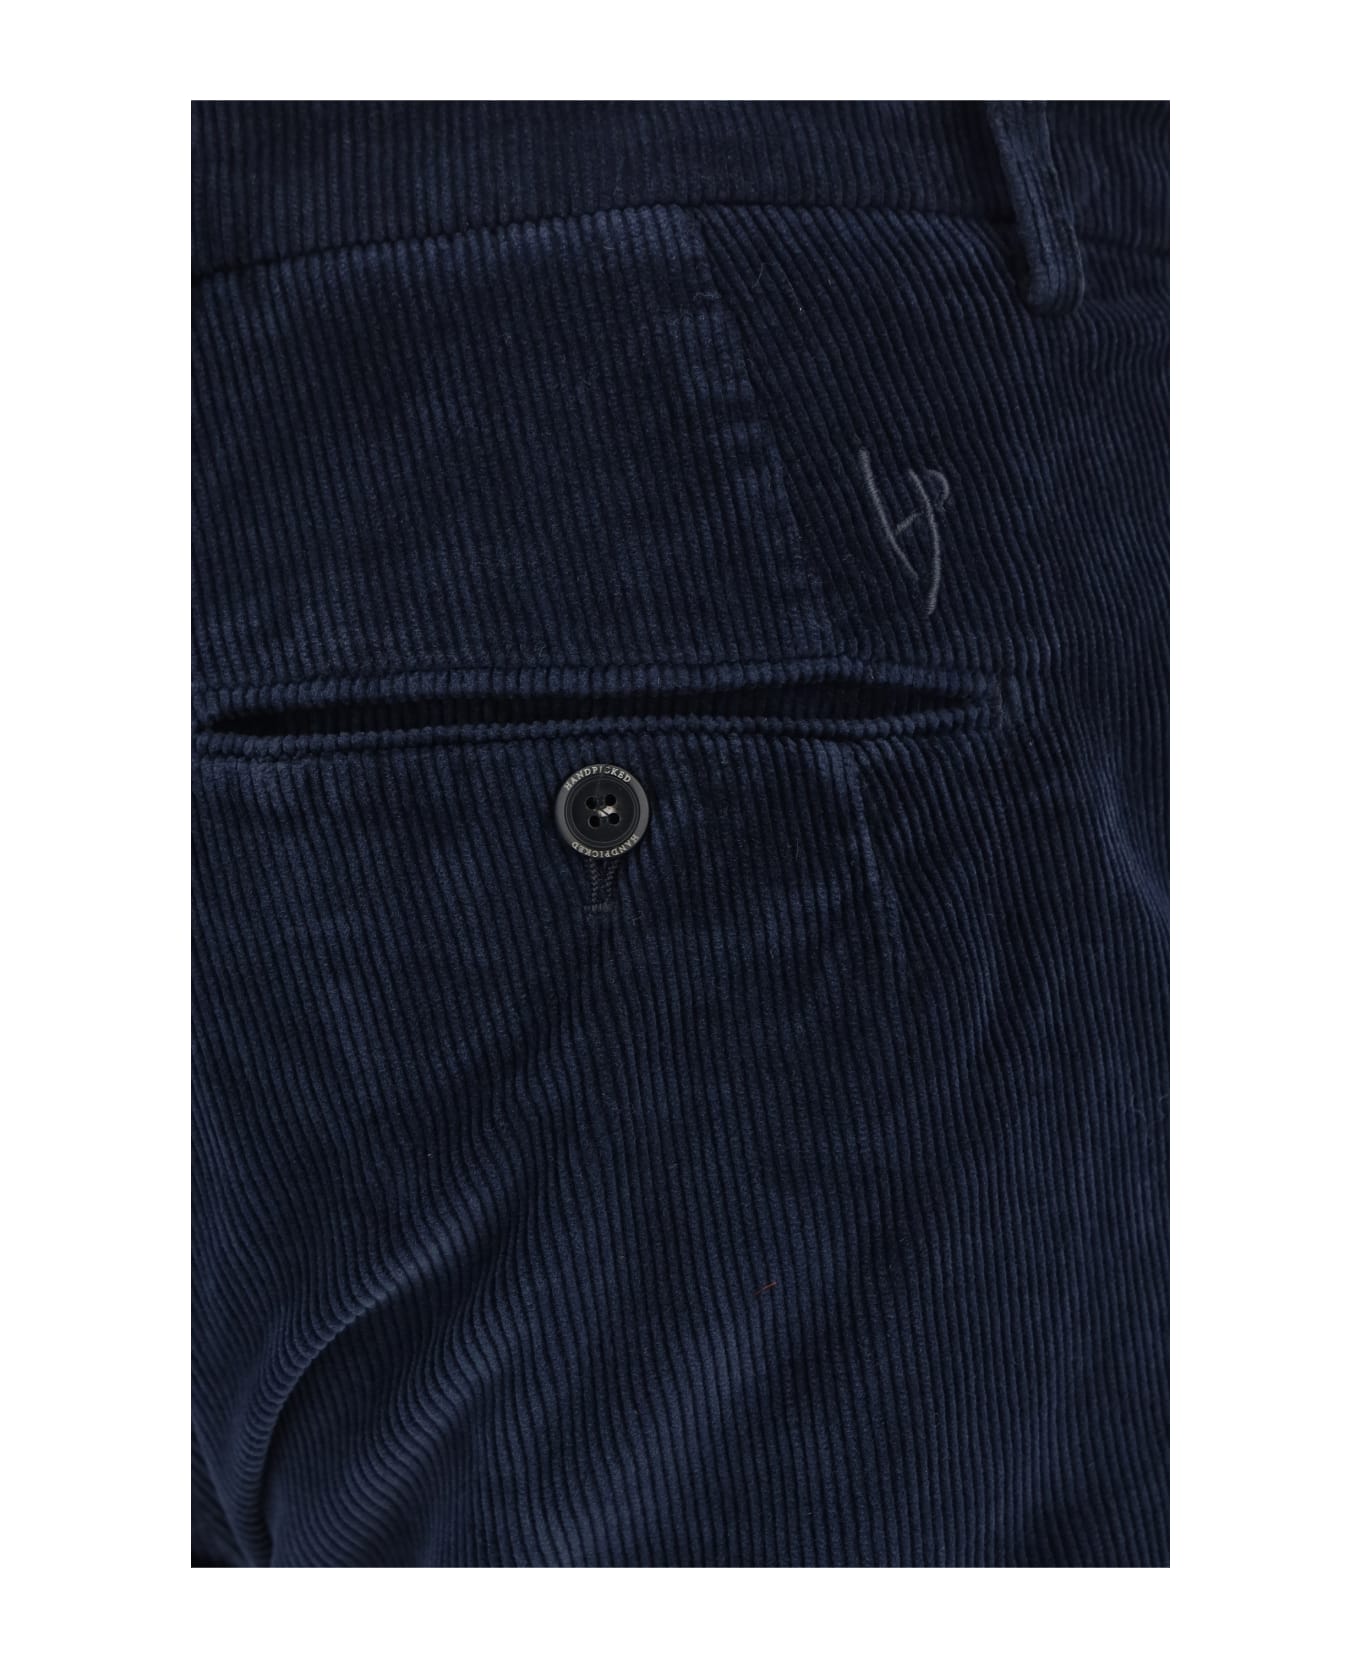 Hand Picked Pants - Blu Scuro